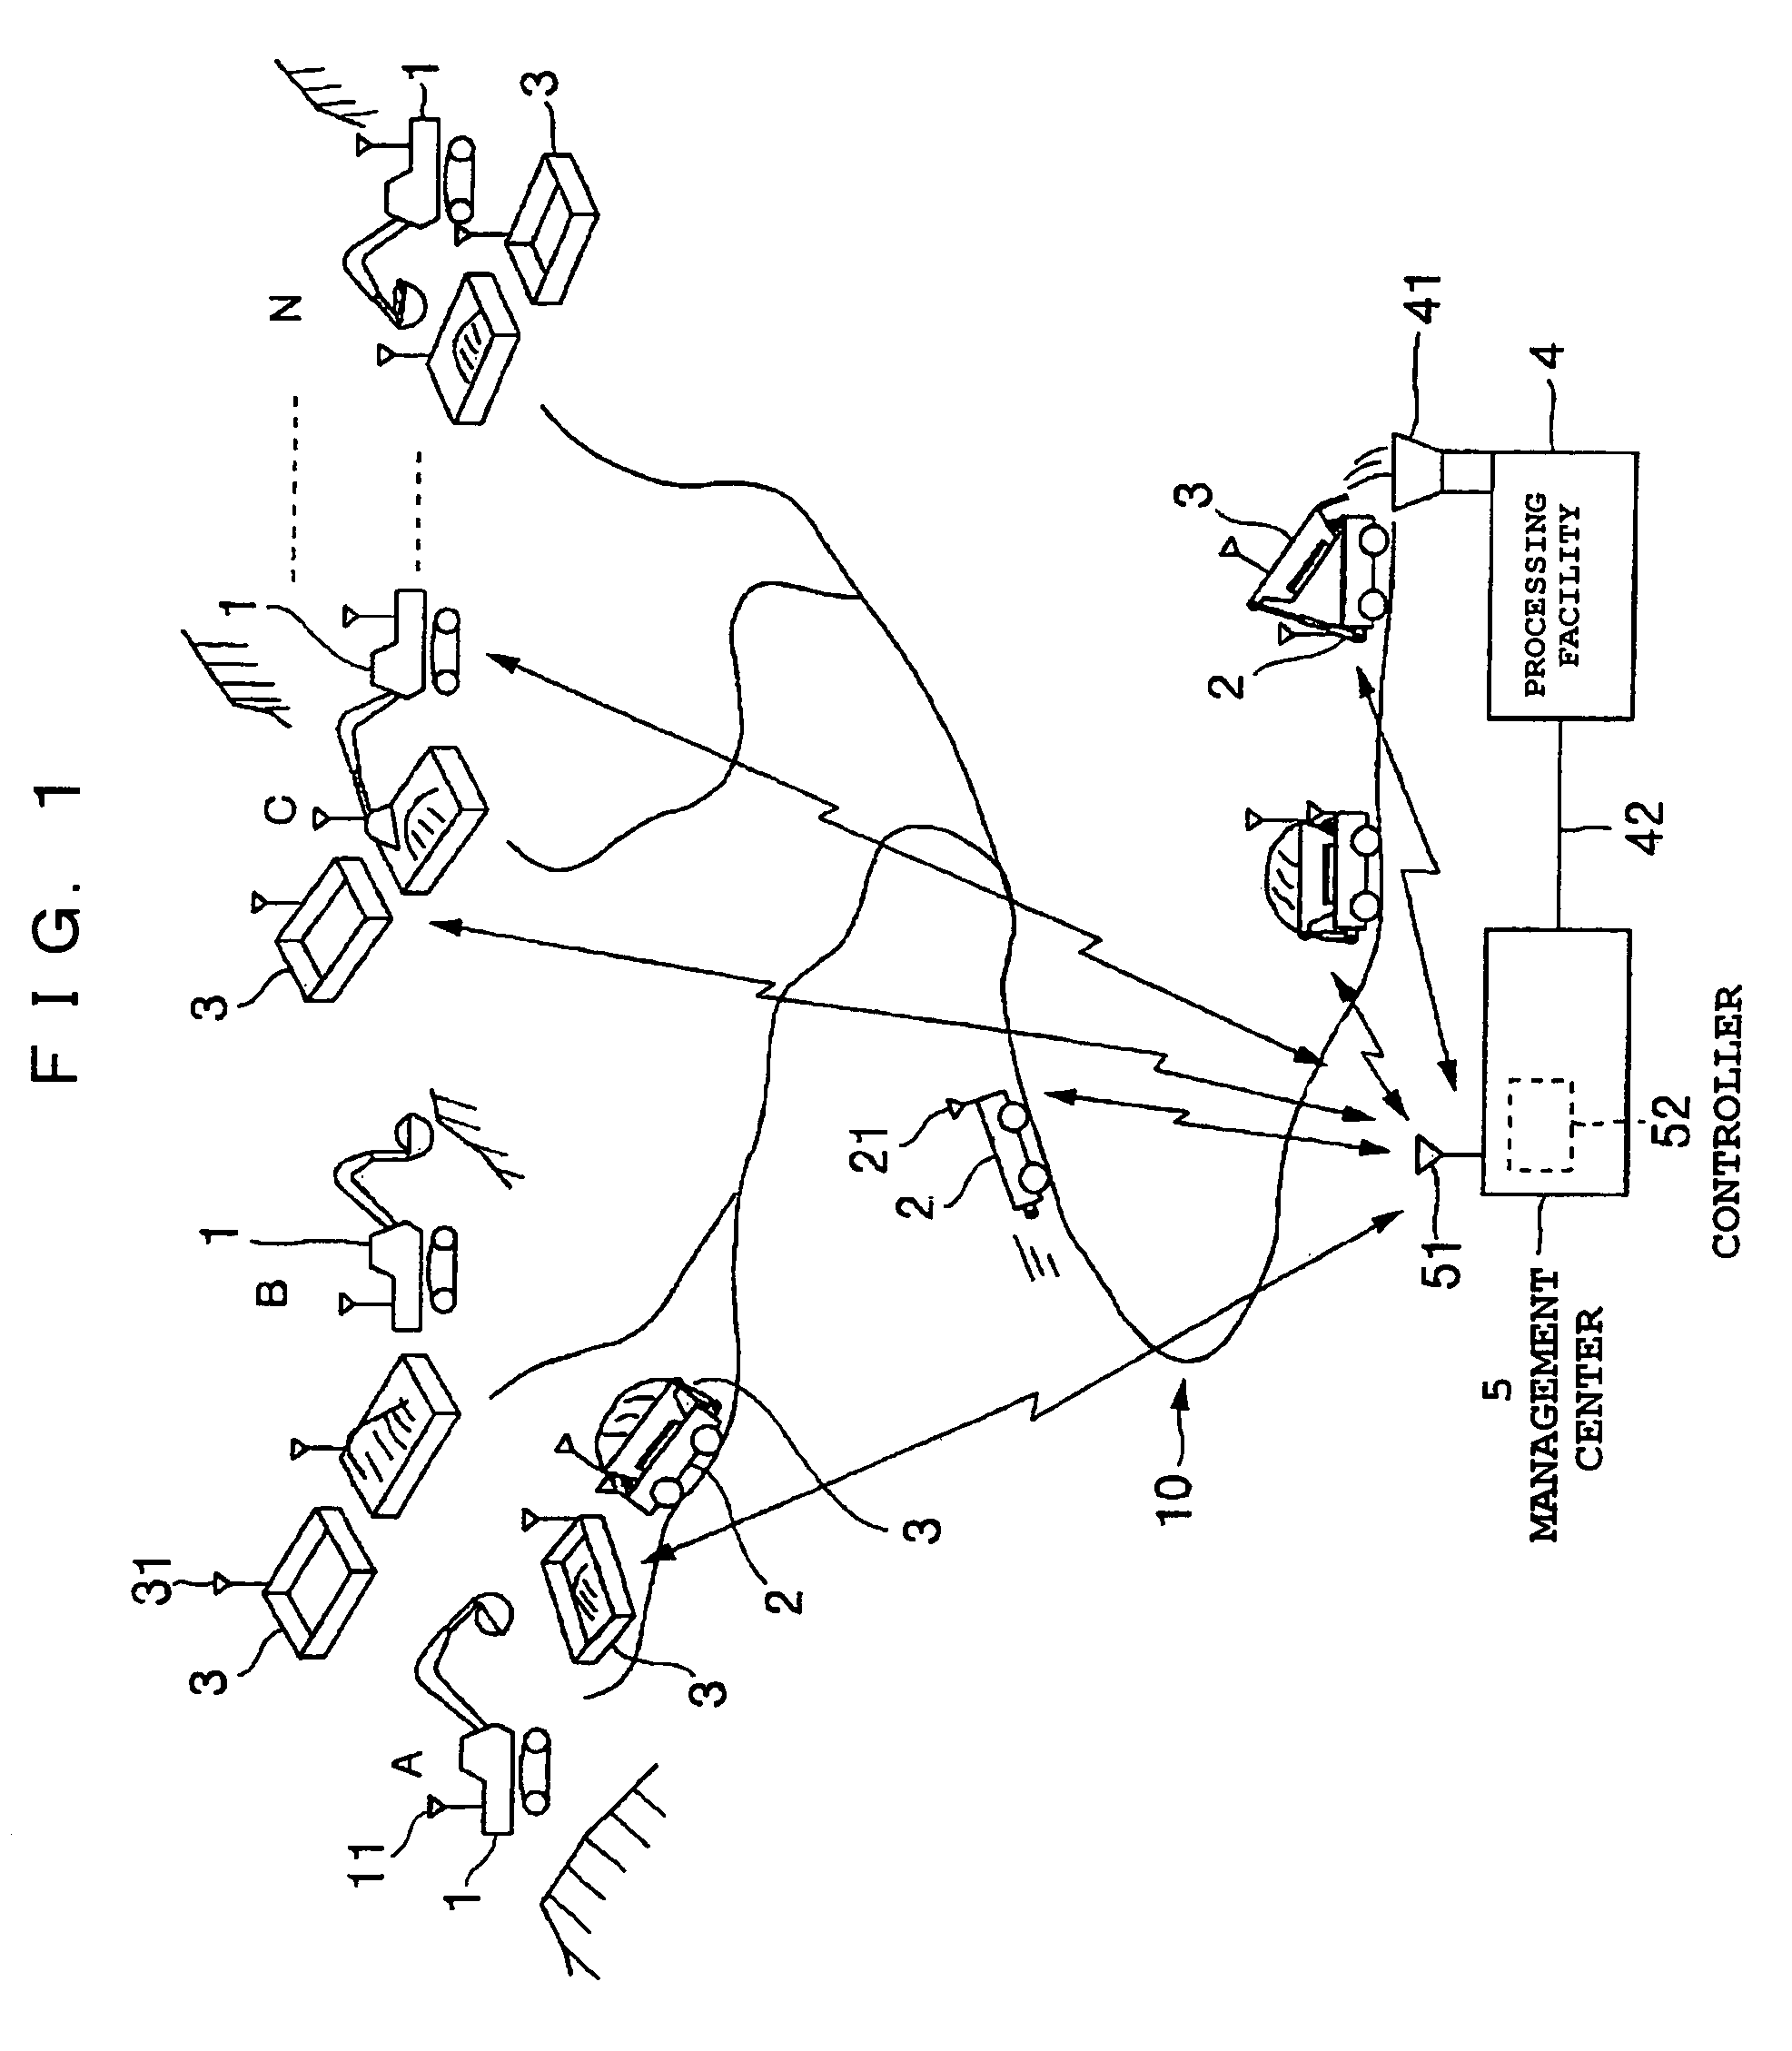 Mine transportation management system and method using separate ore vessels and transport vehicles managed via communication signals